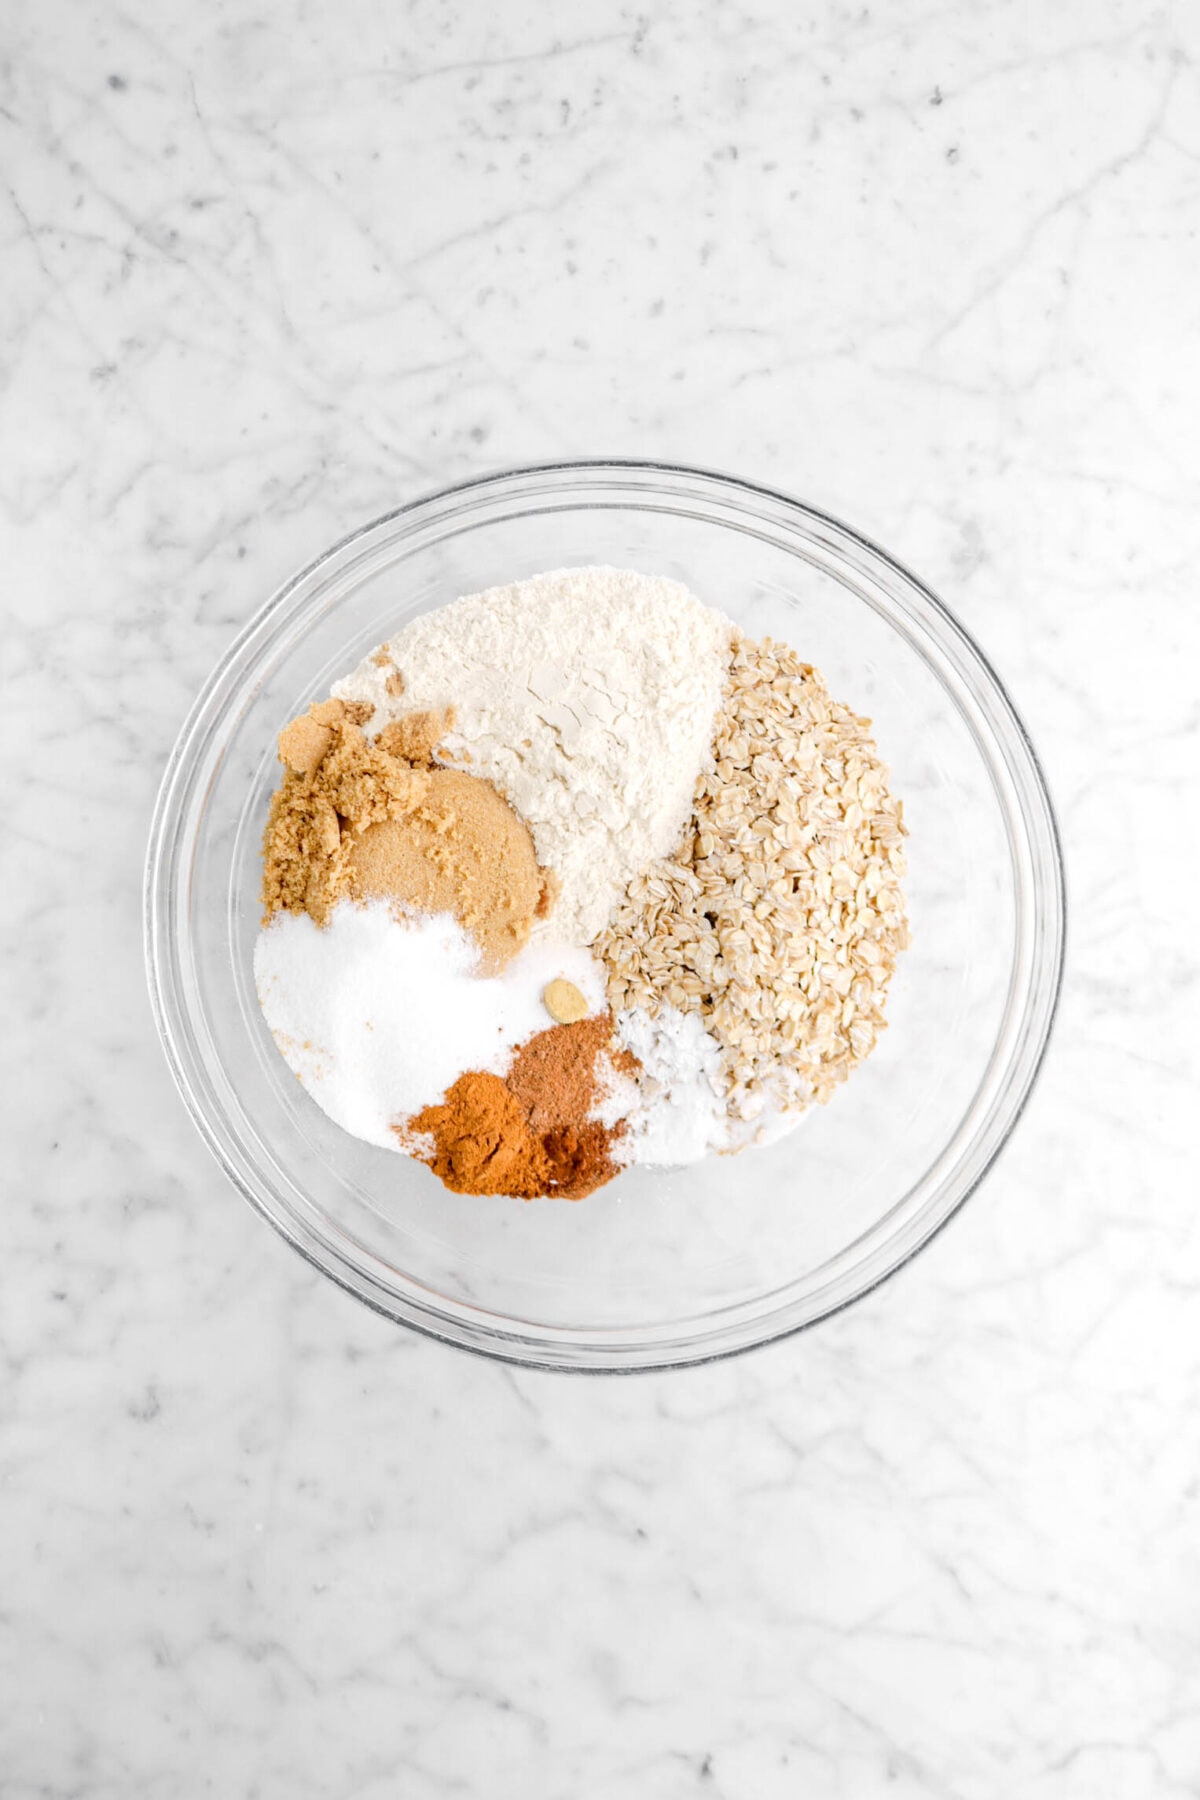 flour, brown sugar, granulated sugar, spices, and oatmeal in glass bowl